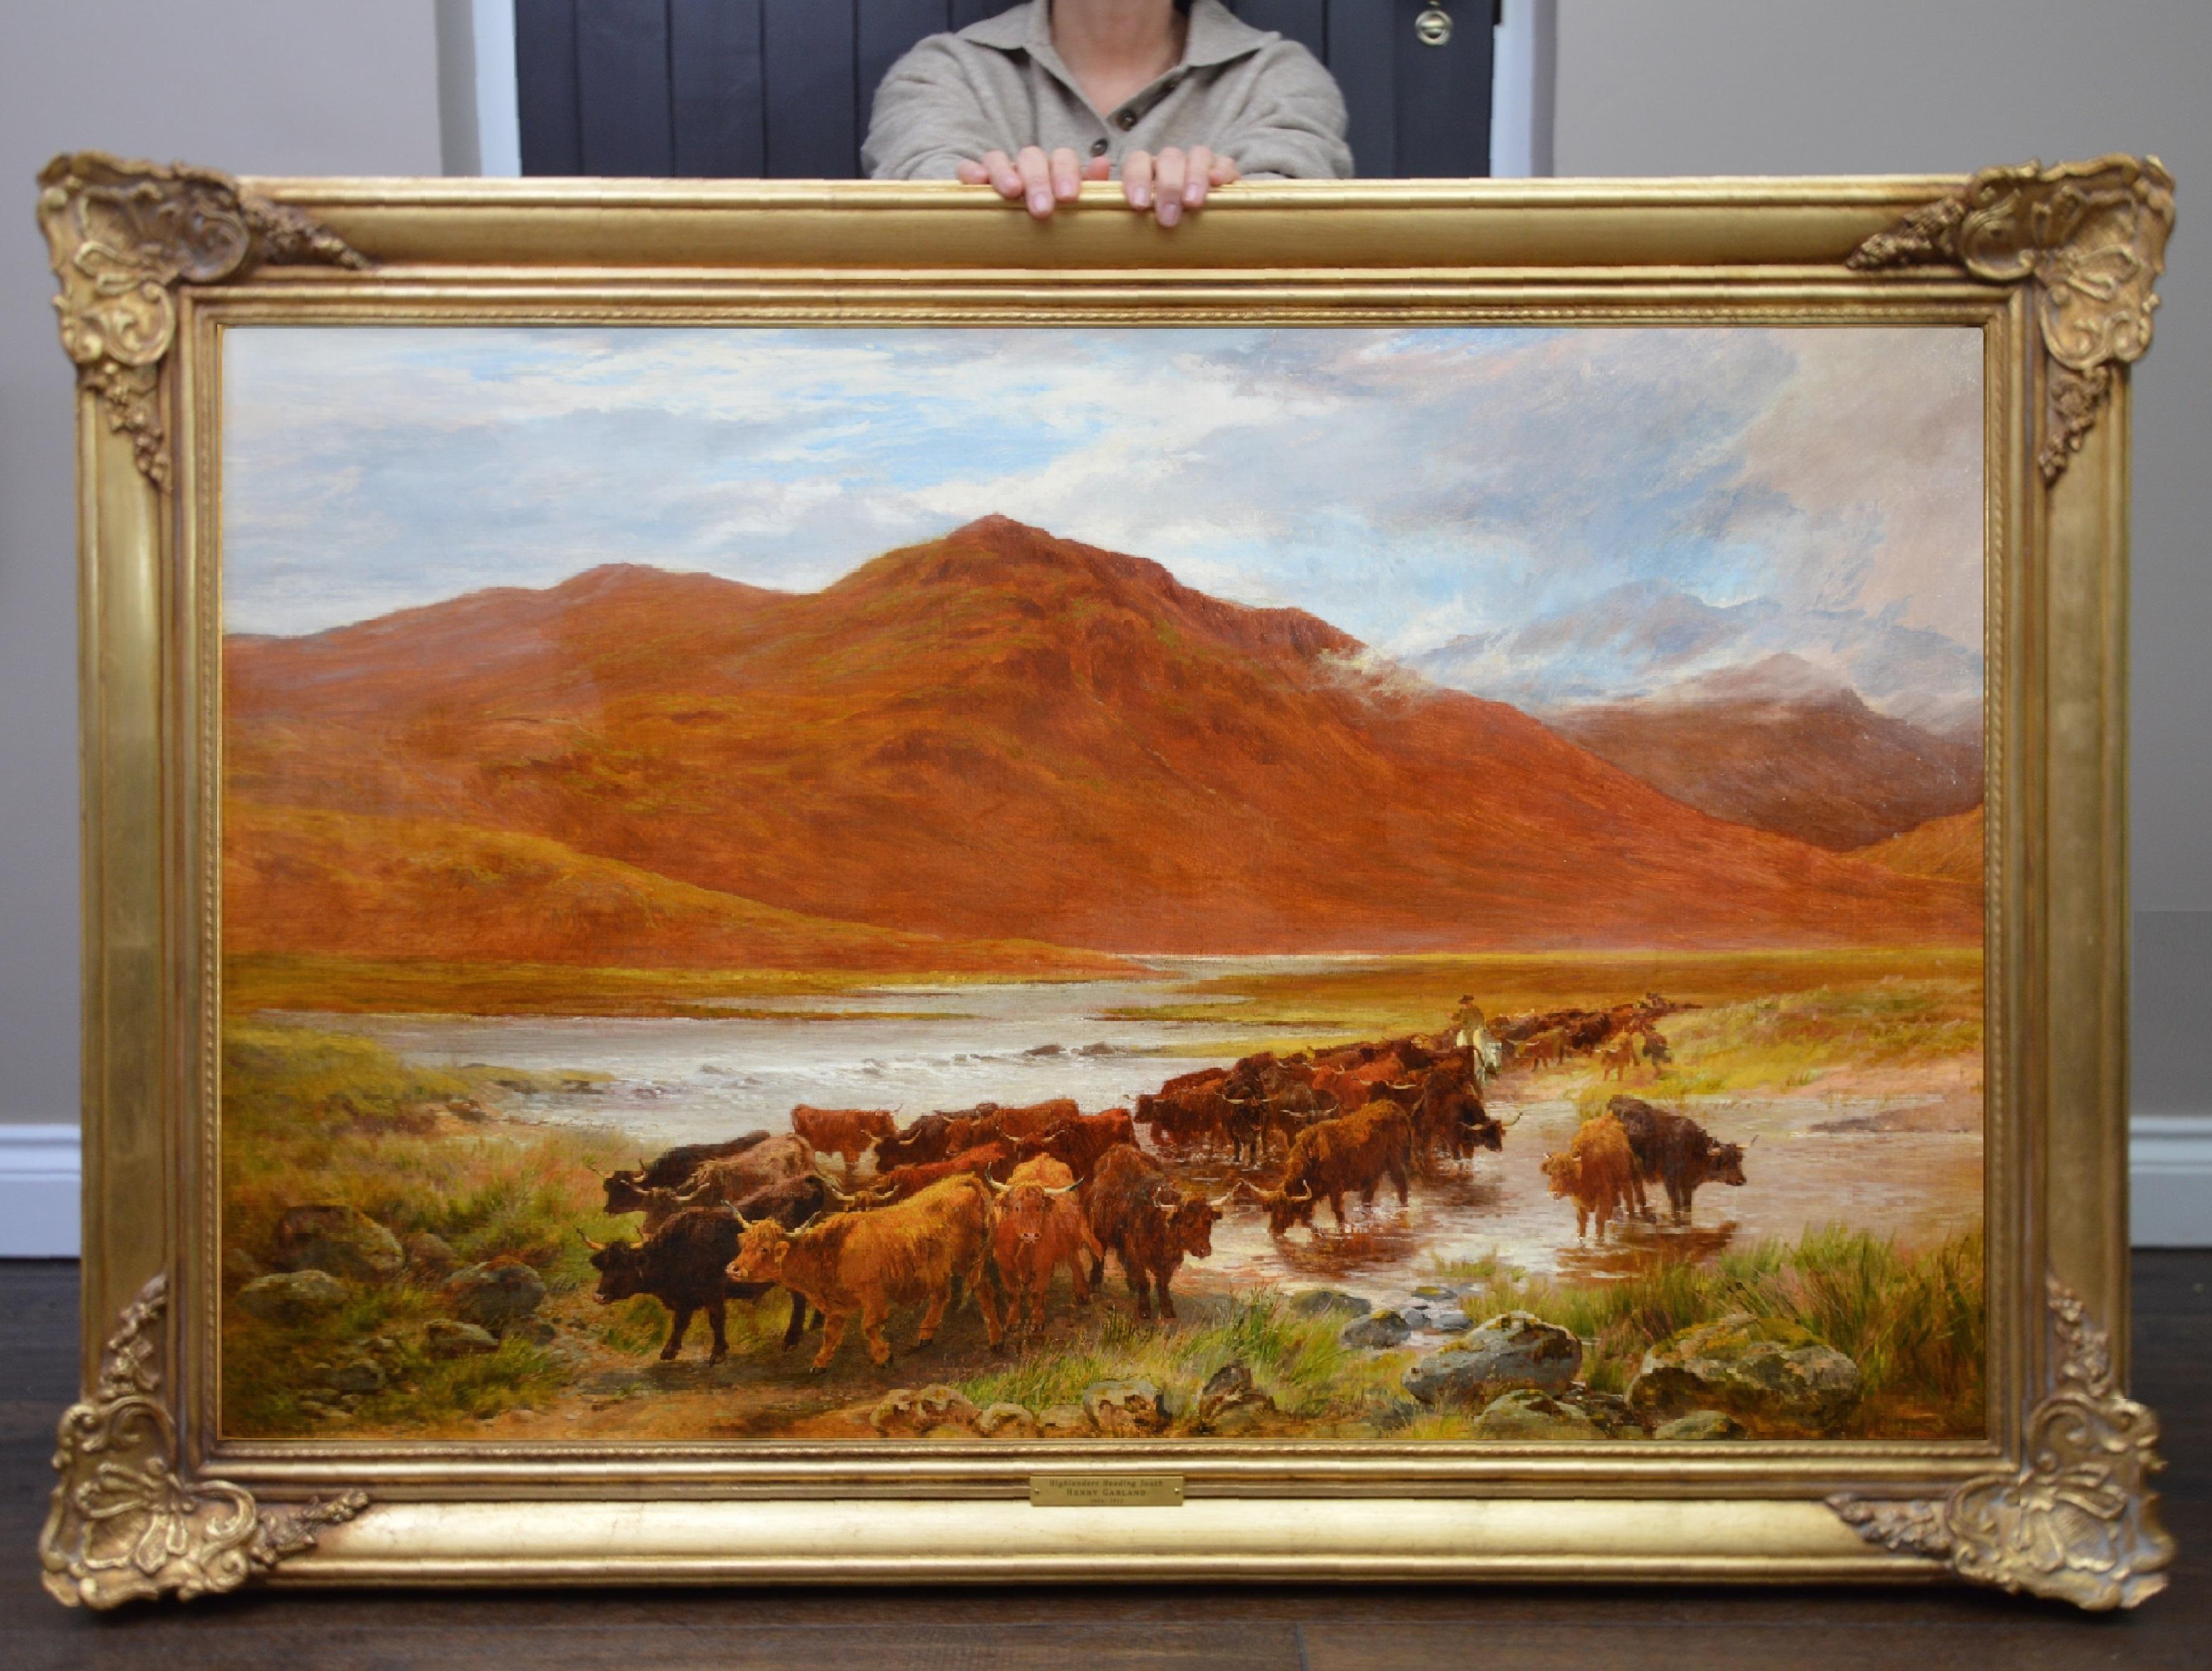 Highlanders Heading South - Large 19th Century Scottish Highlands Oil Painting